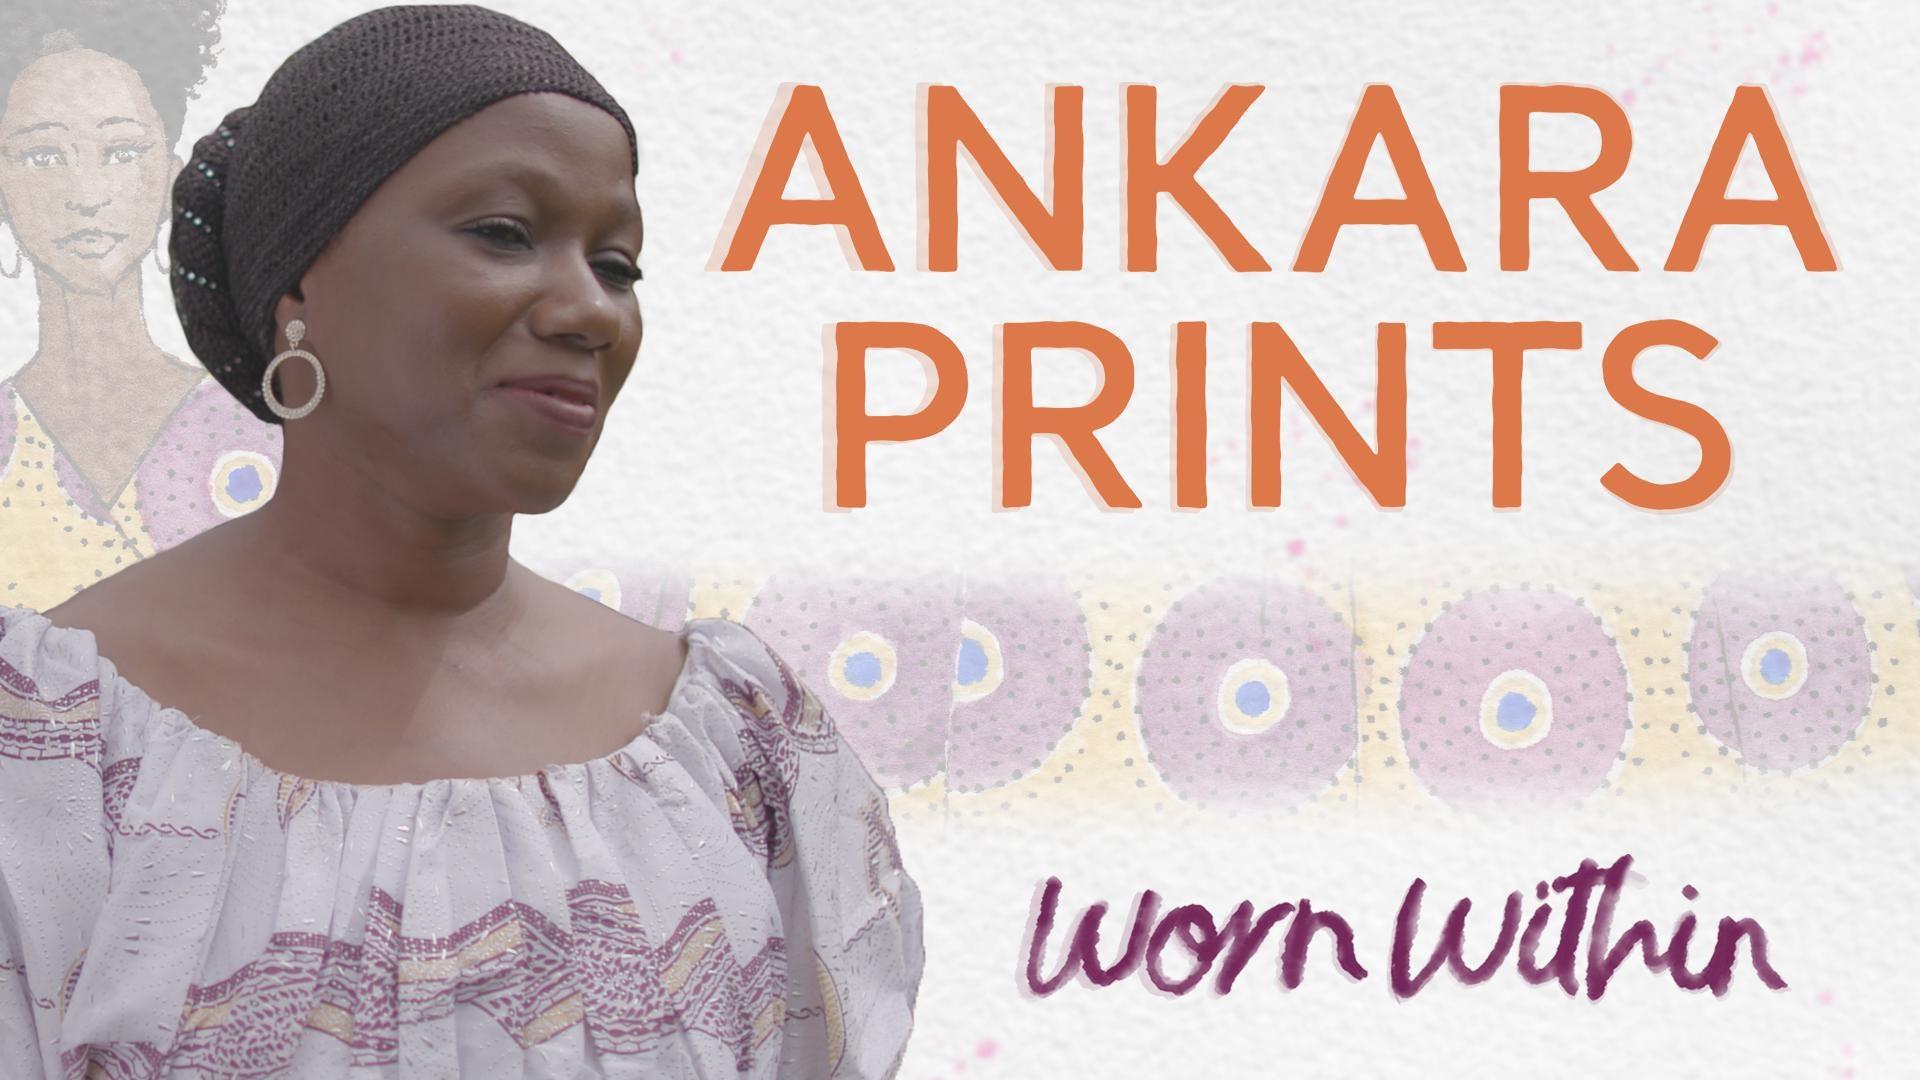 worn-within-west-african-ankara-prints-twin-cities-pbs